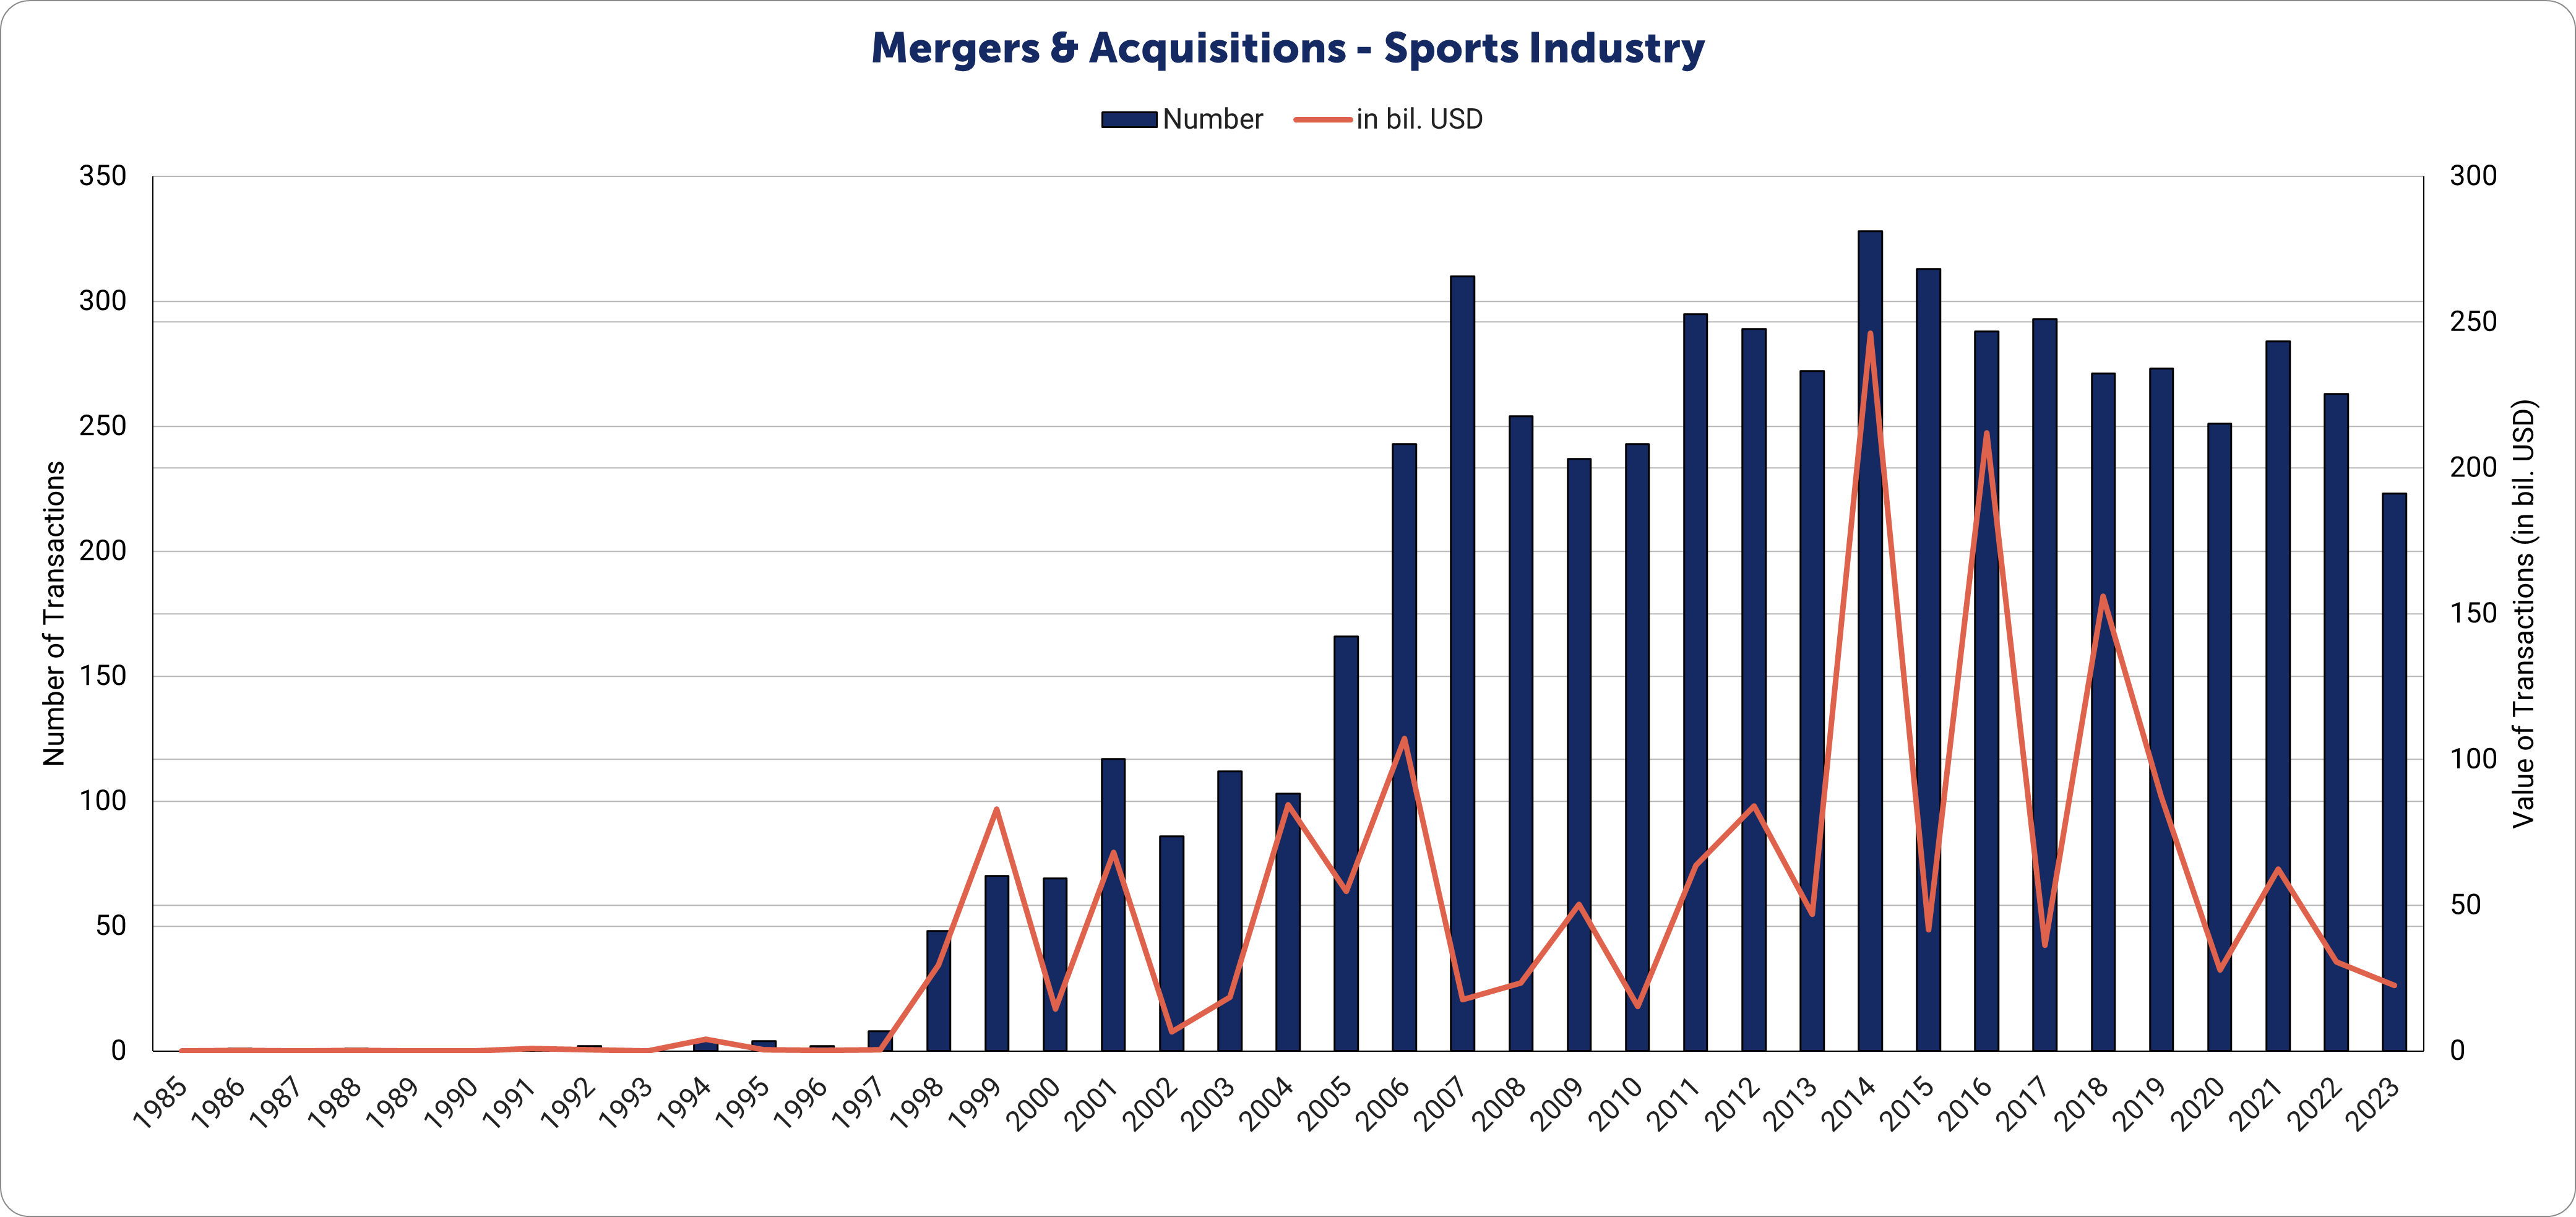 Mergers & Acquisitions - Sports Industry Annual M&A Deals